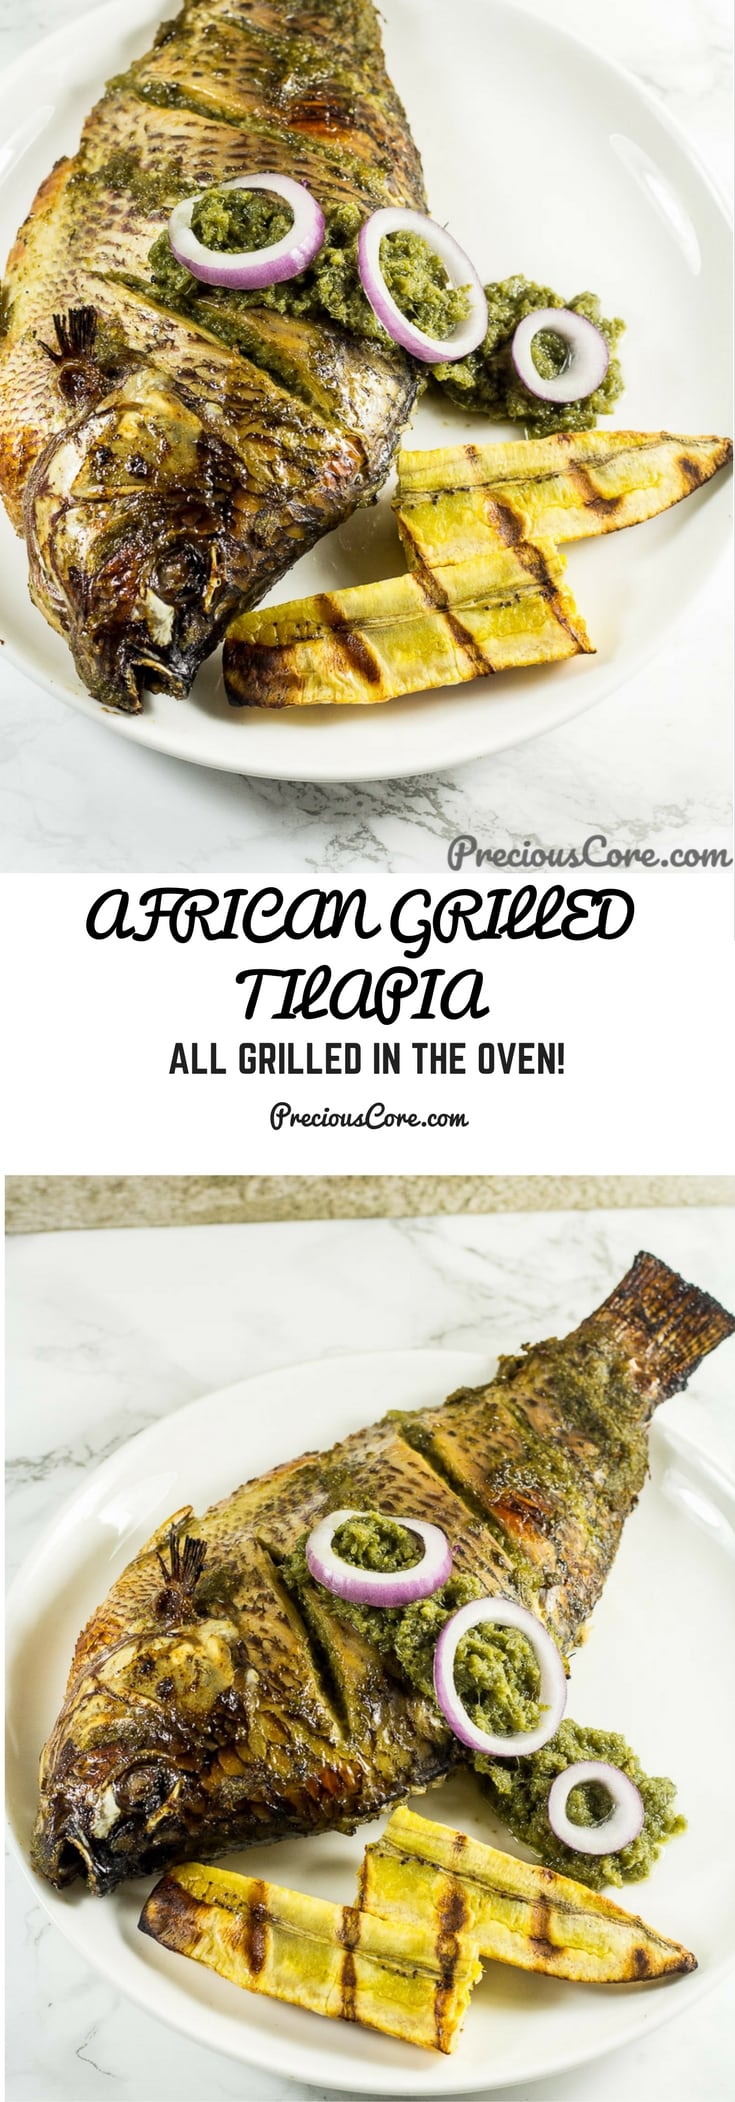 Oven grilled tilapia made with West African flavors. So tasty! Get the recipe on Precious Core. #Grilledfish #Seafood #Africanfood #Tilapia #dinner